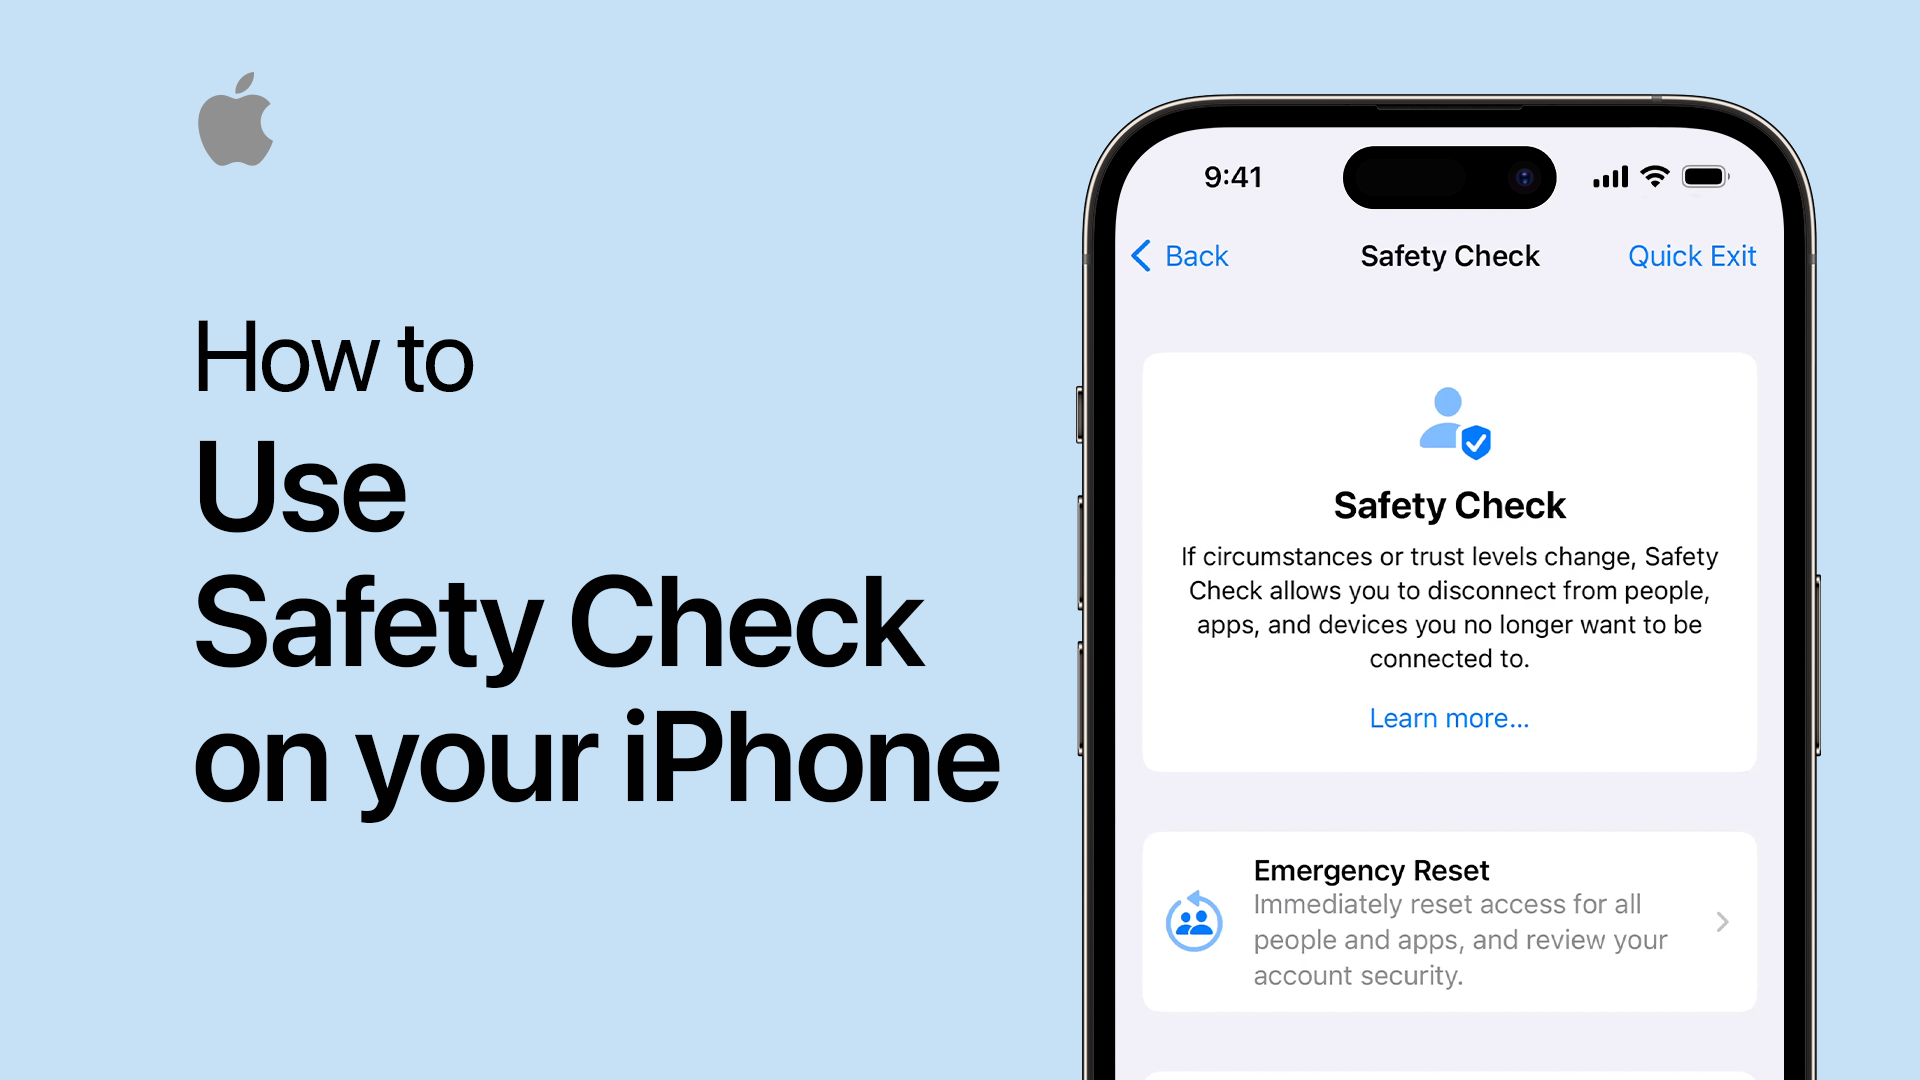 Is photos in iPhone safe?